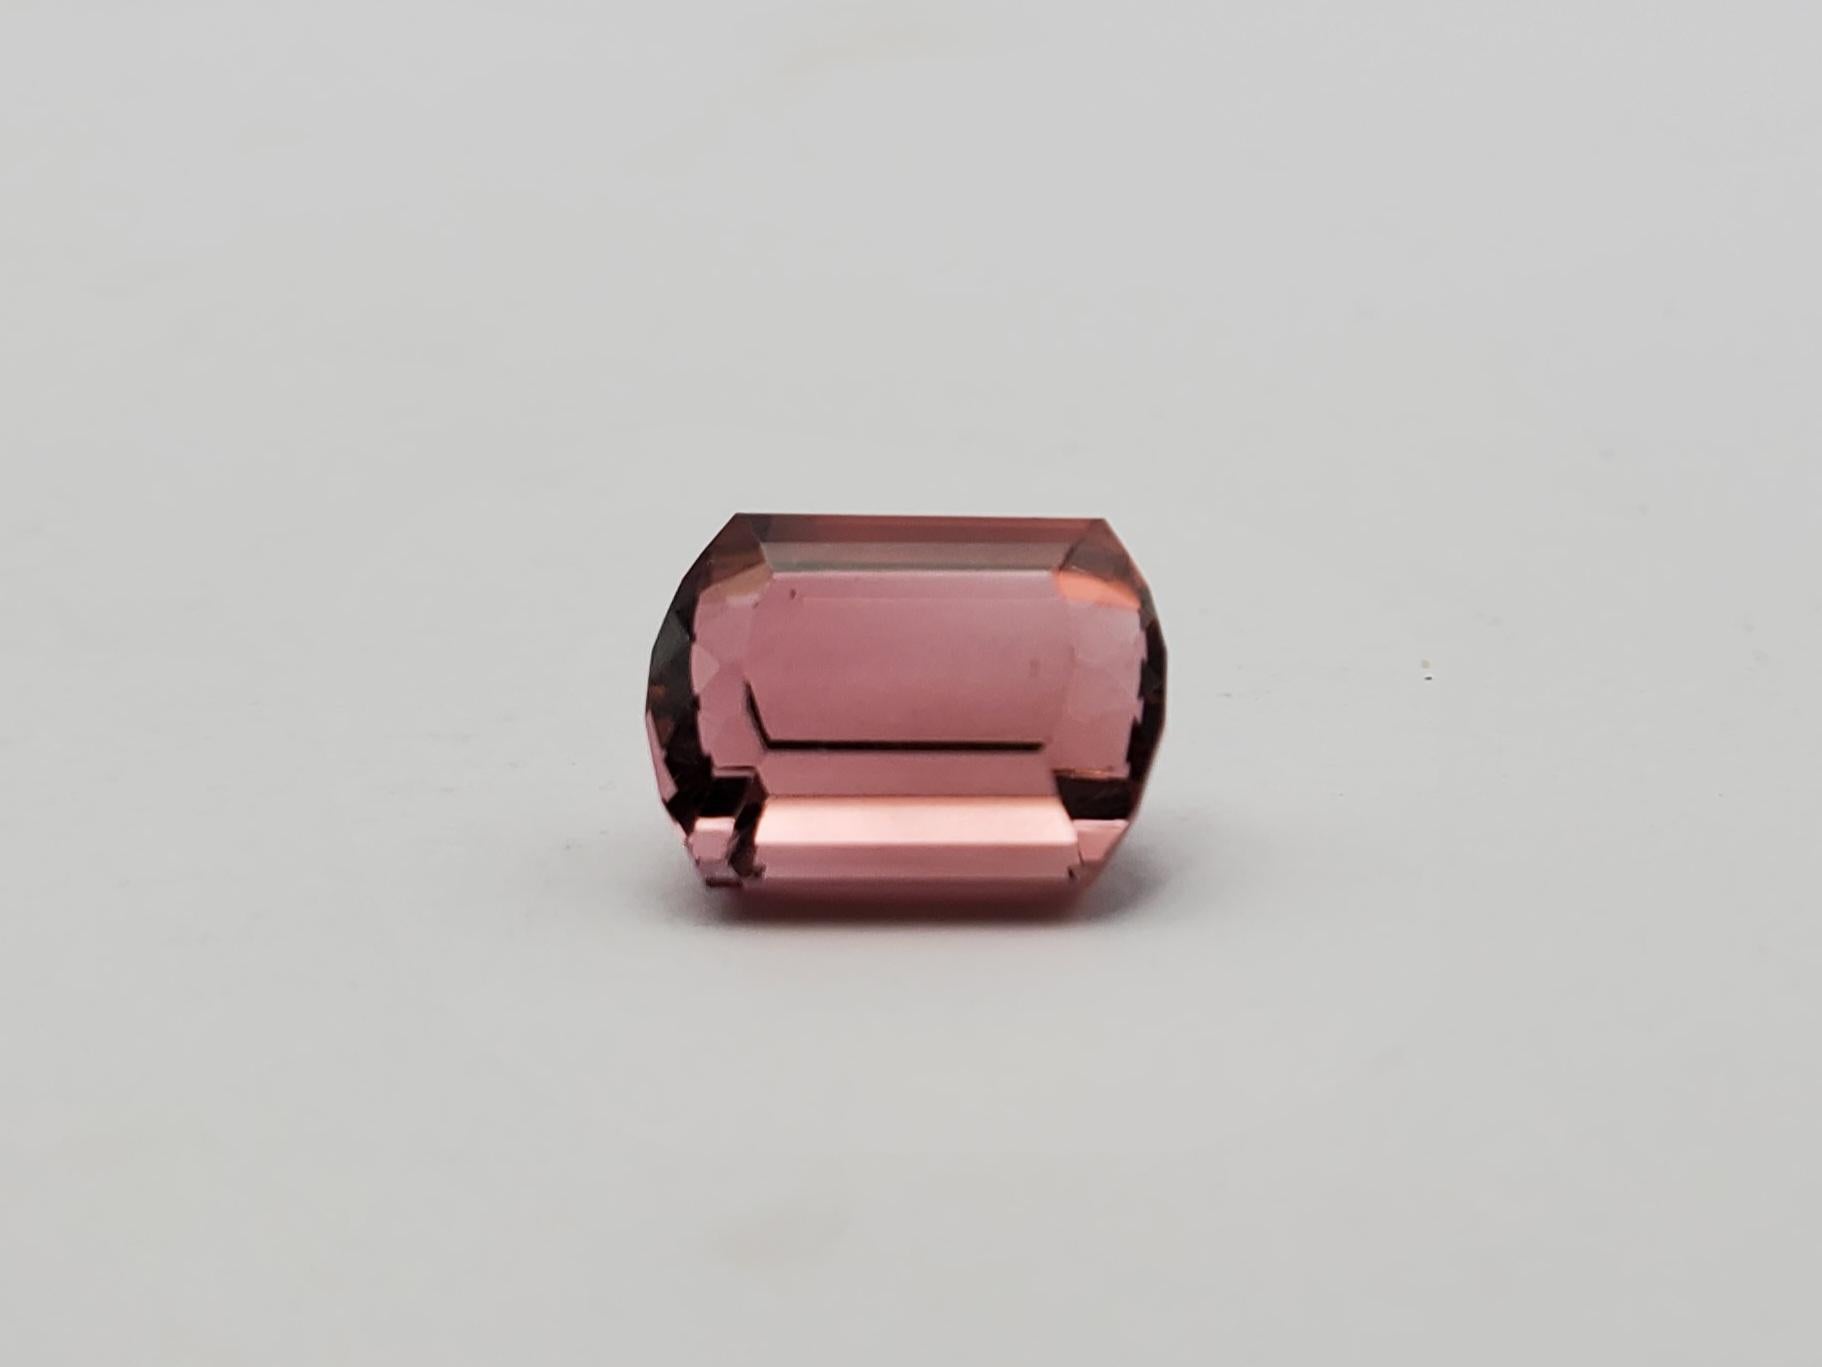 Crafted from the earth's natural treasures, this stunning 6.45ct pink tourmaline is a testament to beauty and craftsmanship. The gem exhibits a barrel cut shape, giving it an unusual silhouette that is both eye-catching and enchanting. Measuring an